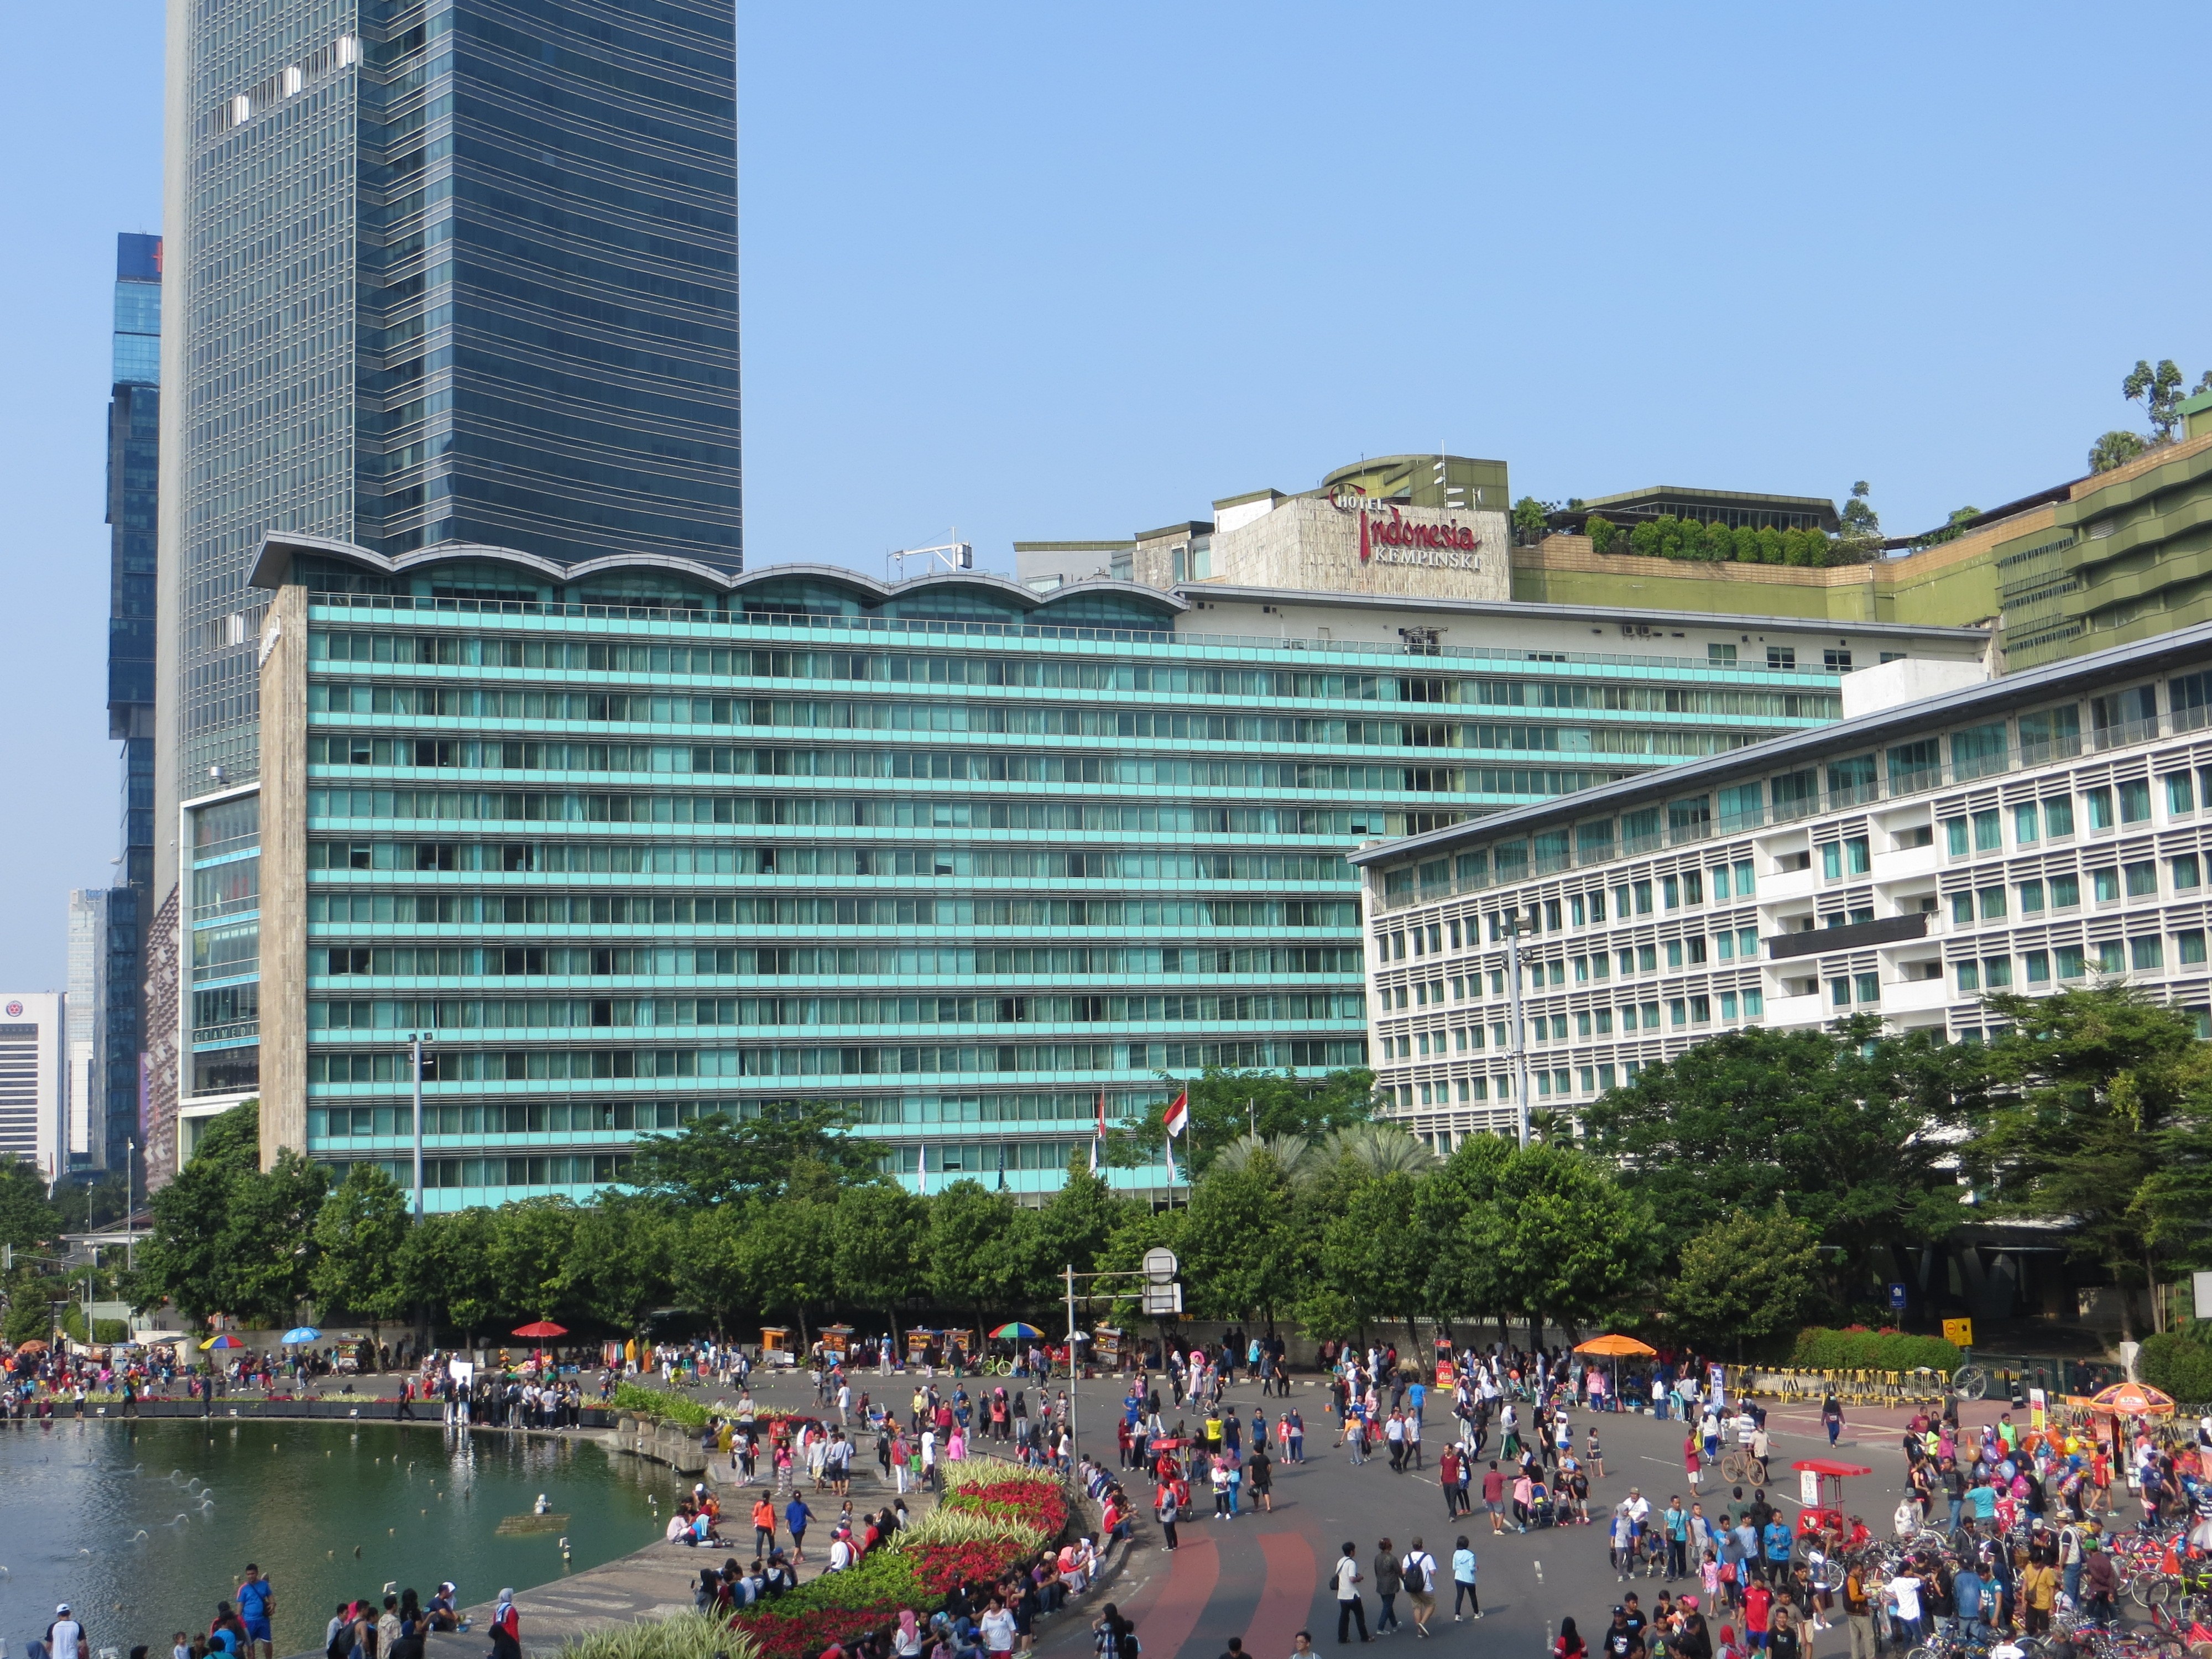 Crowds of people doing activities on the Hotel Indonesia Roundabout on a recent “car free” day, with the five-star Hotel Indonesia in the background. Photo: Shutterstock